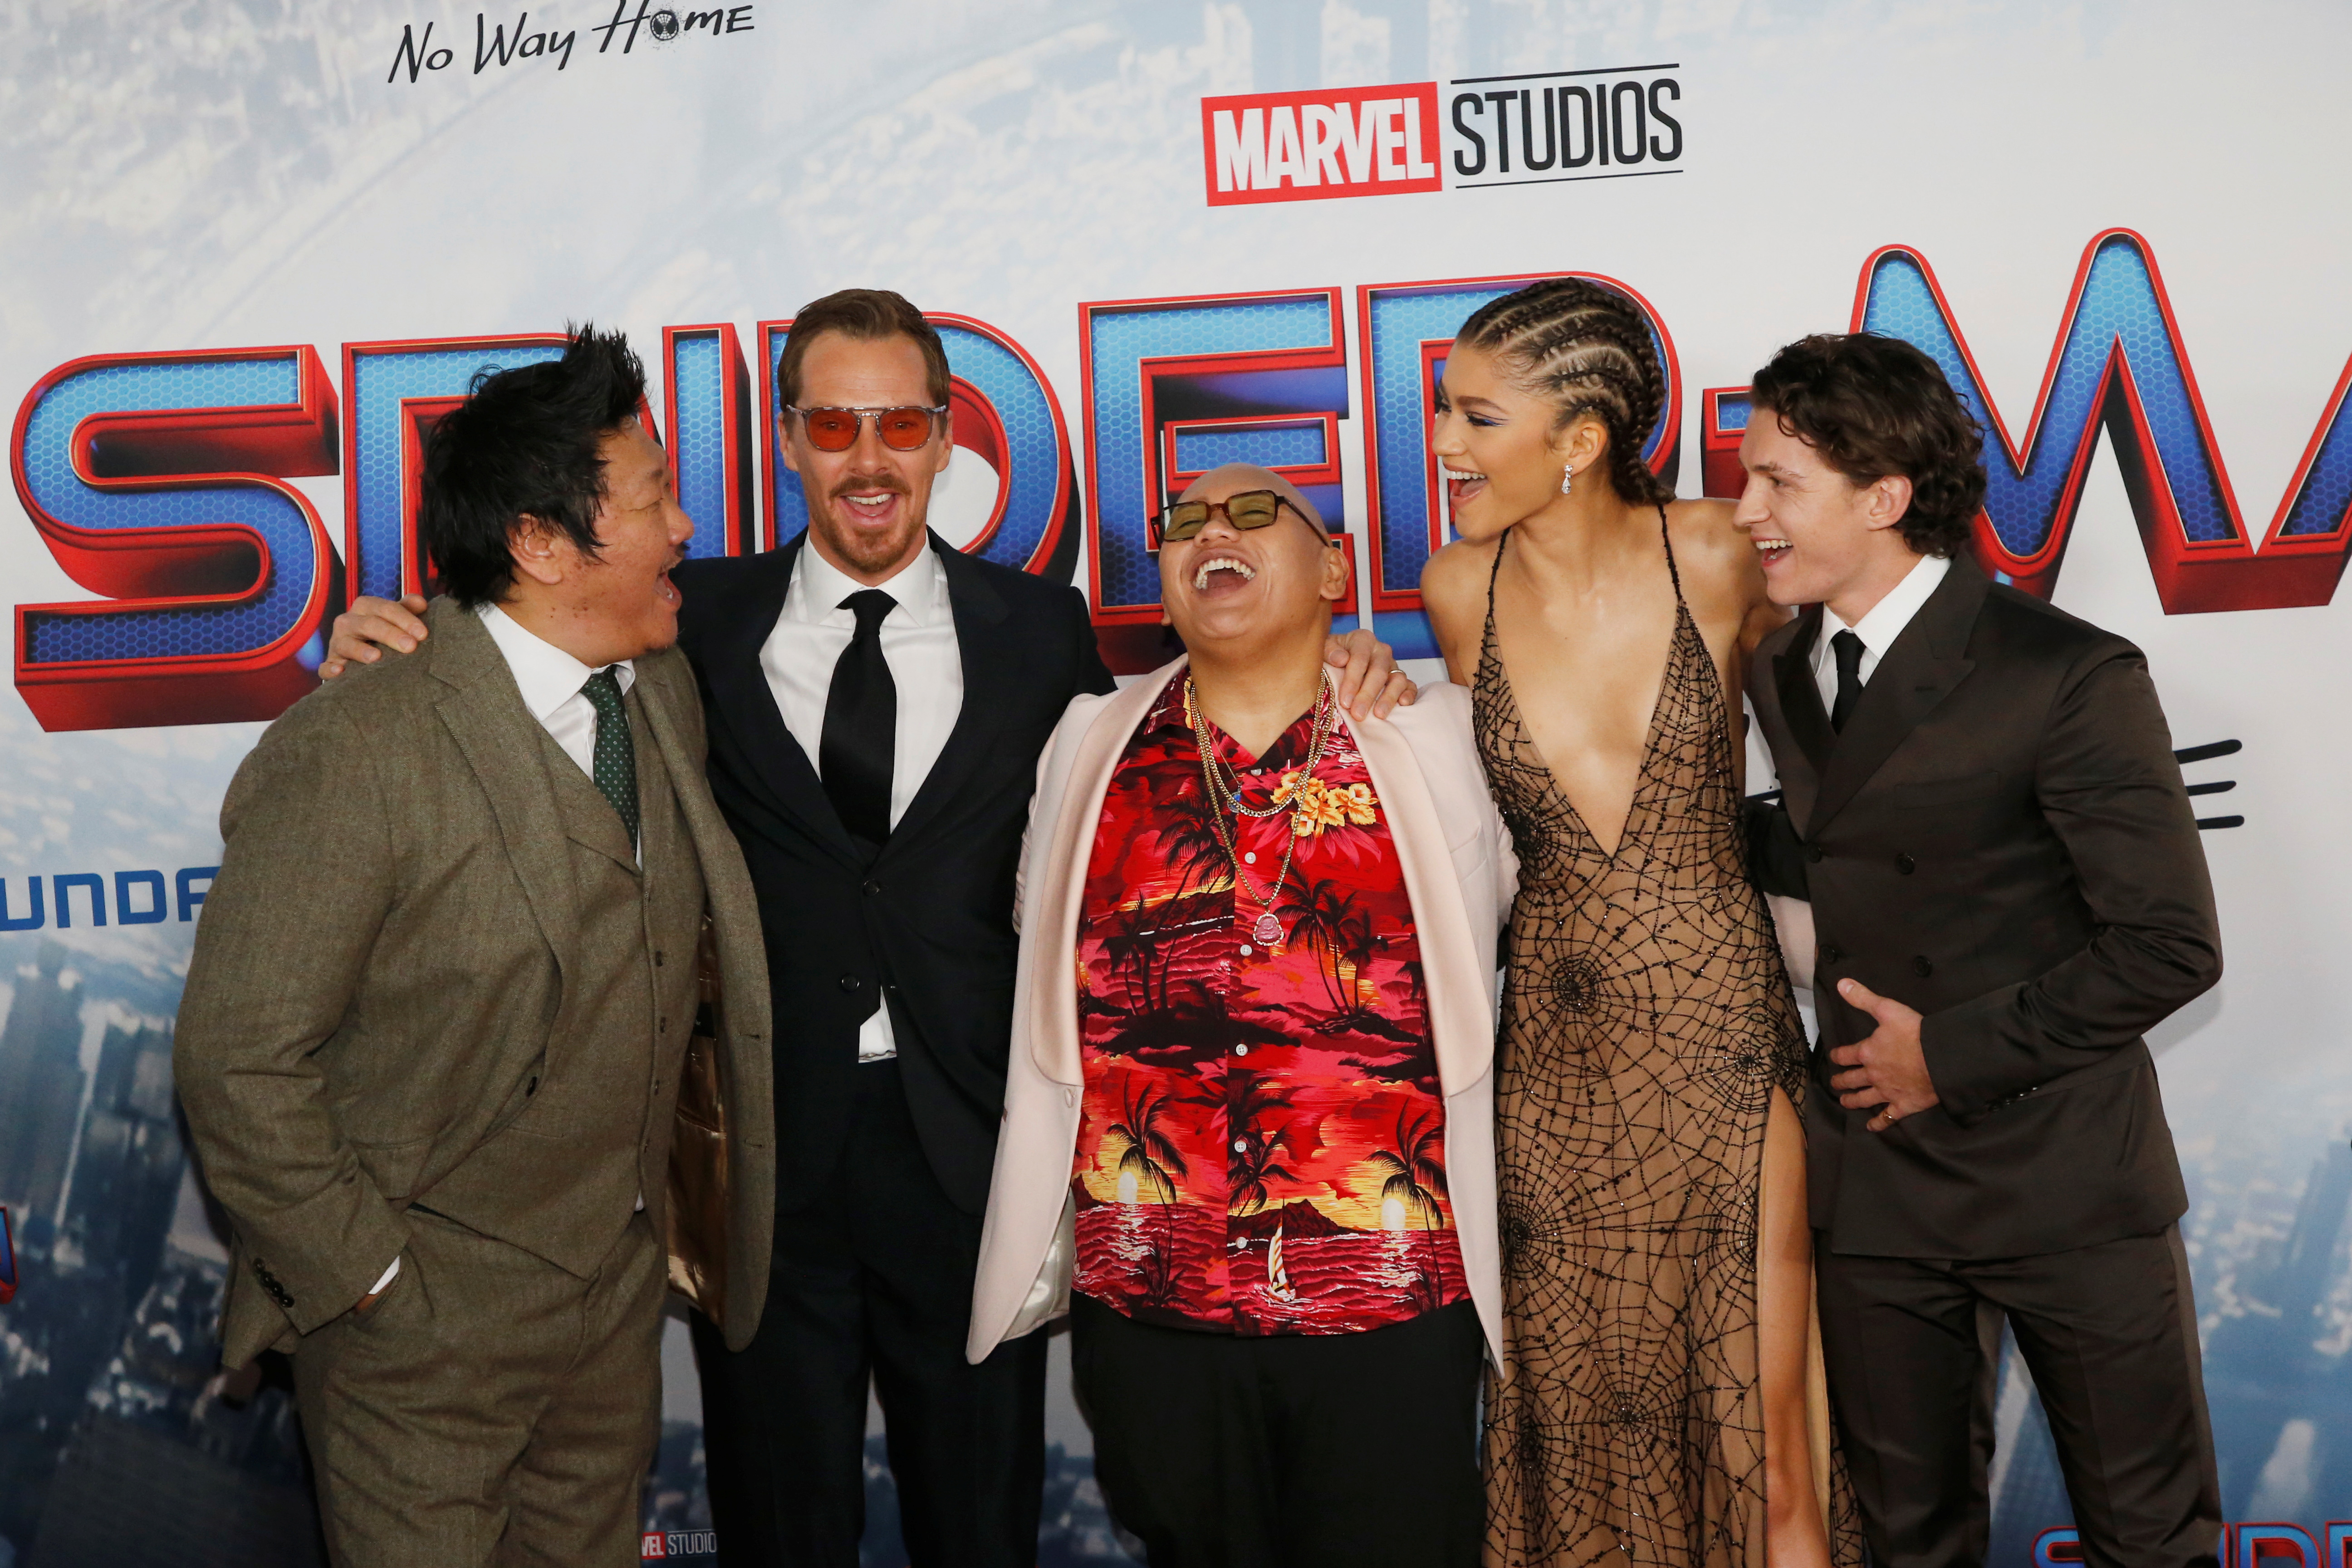 Premiere for the film Spider-Man: No Way Home in Los Angeles